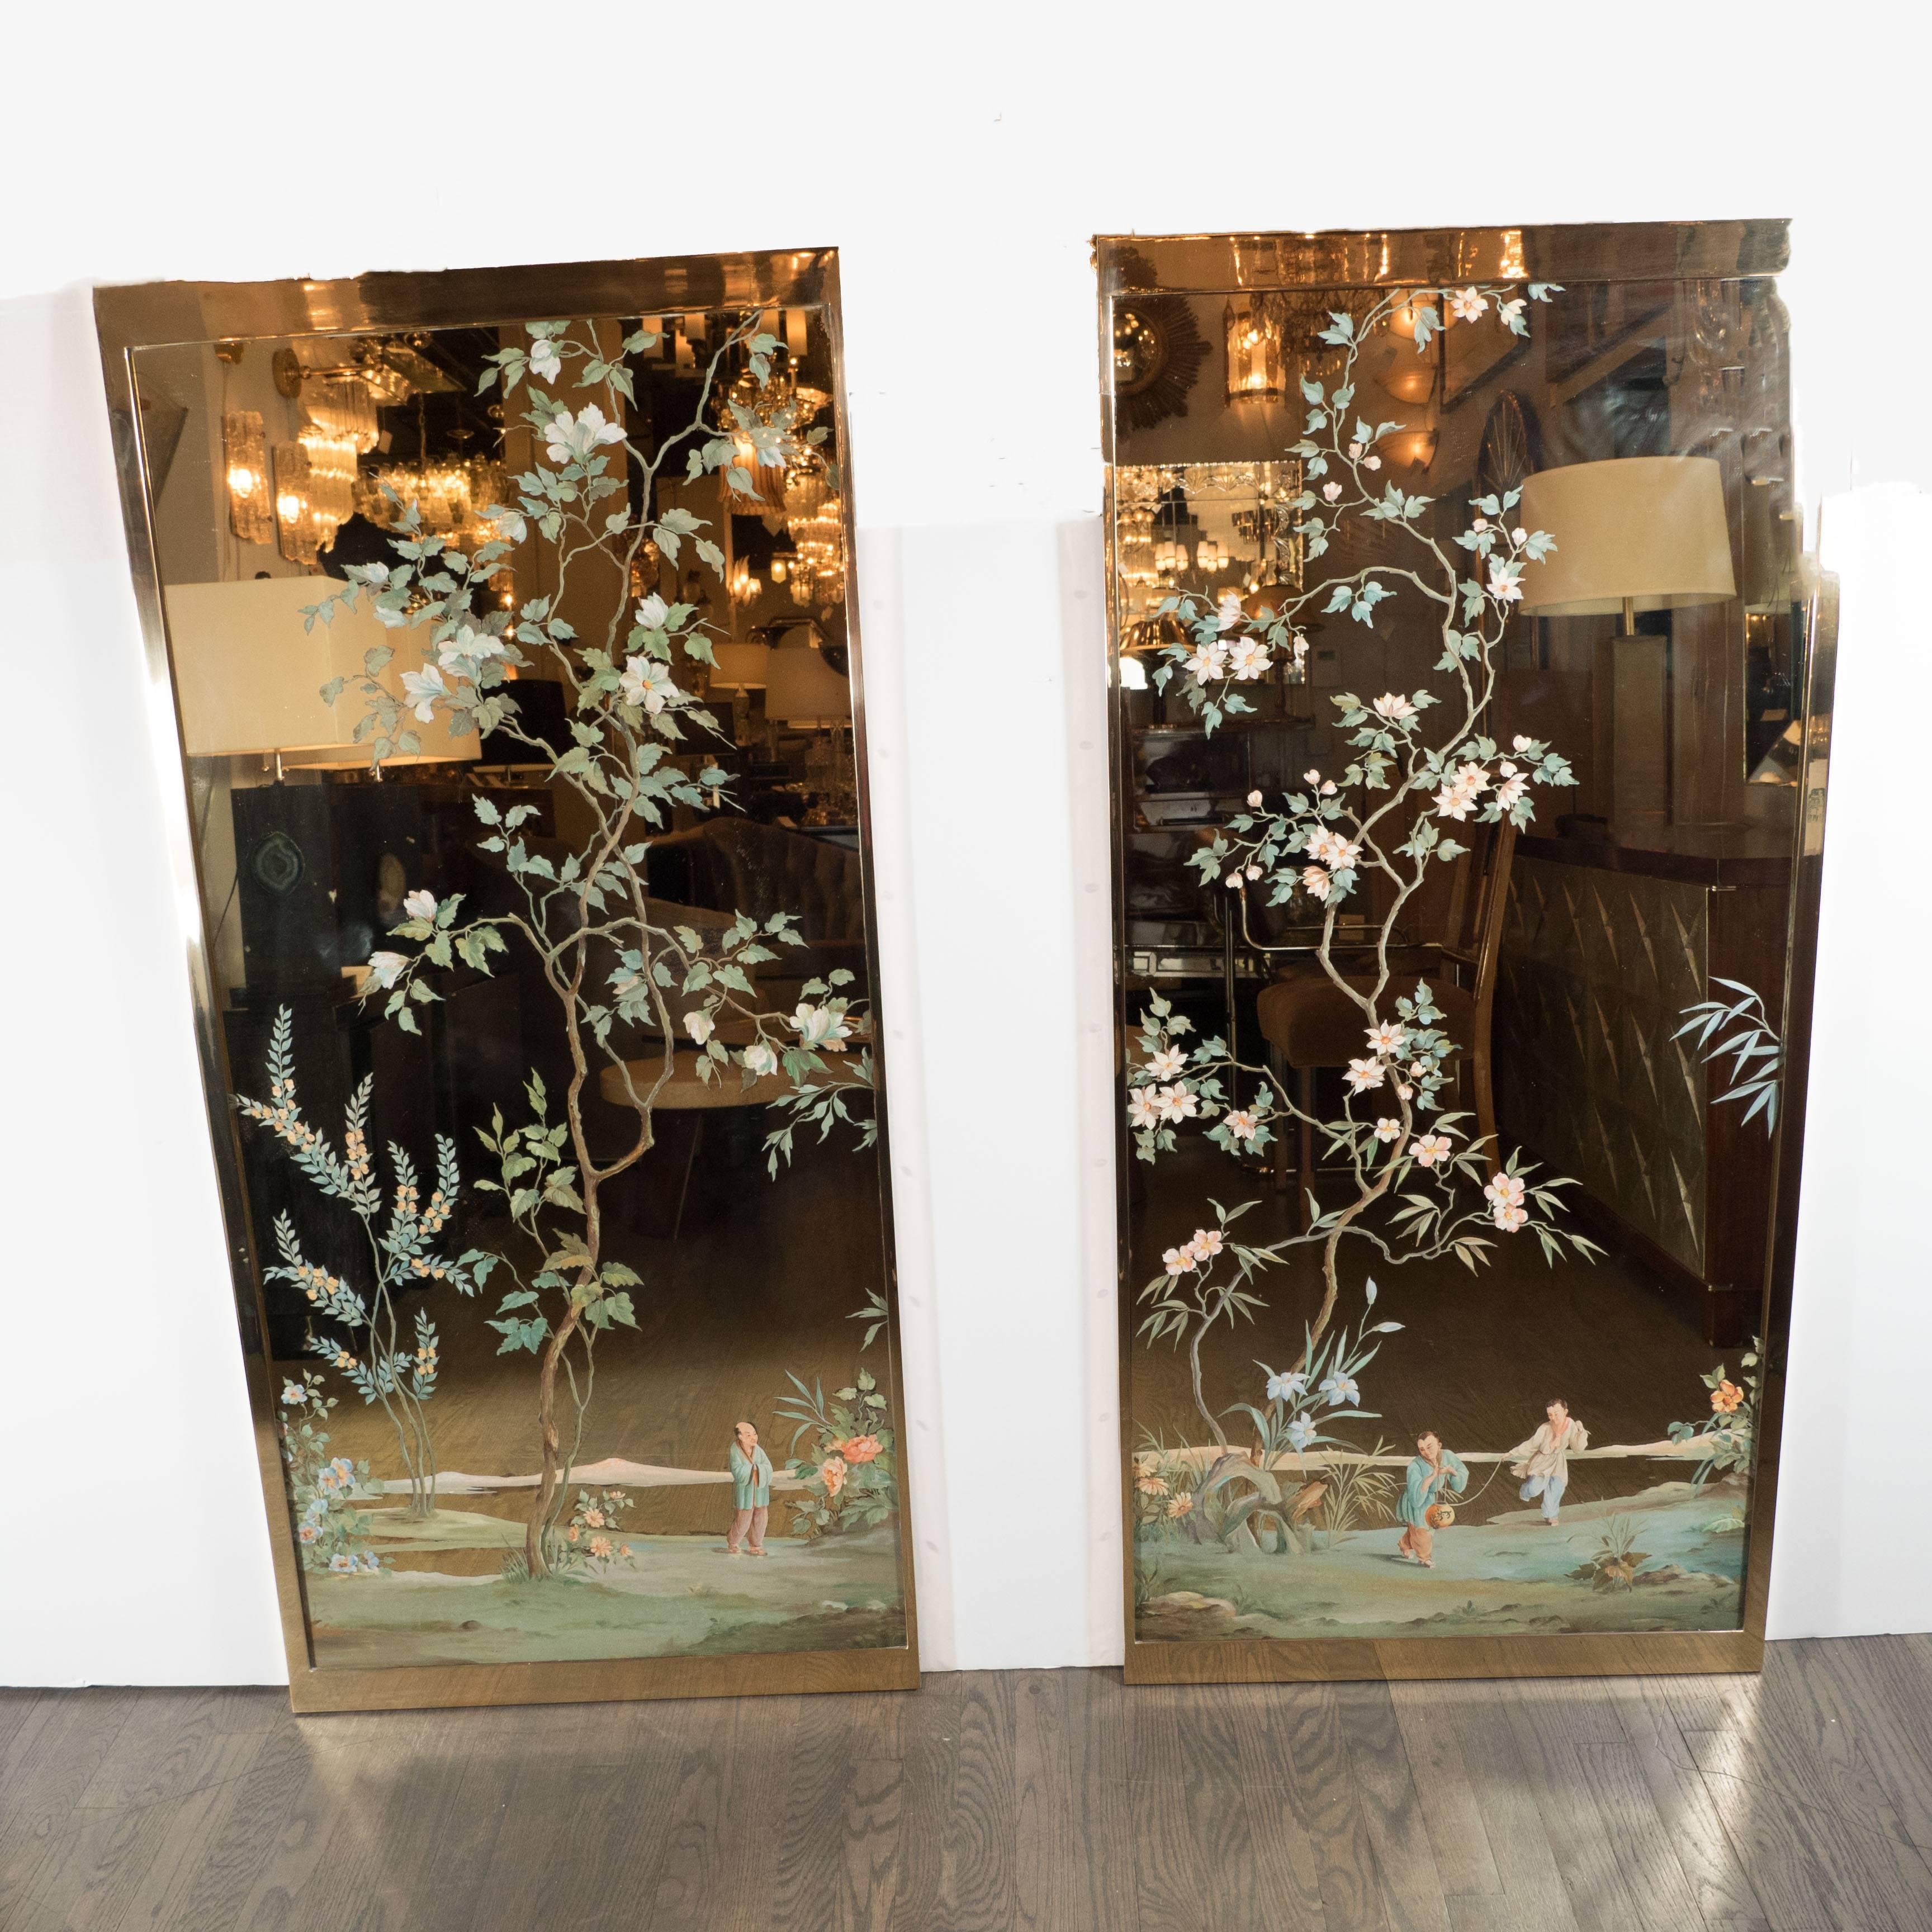 A pair of Mid-Century Modernist mirrors with reverse painted chinoiserie garden scenes, one panel depicts a young couple frolicking about a landscape with various trees, and extensive foliate detailing. The second panel which connects the